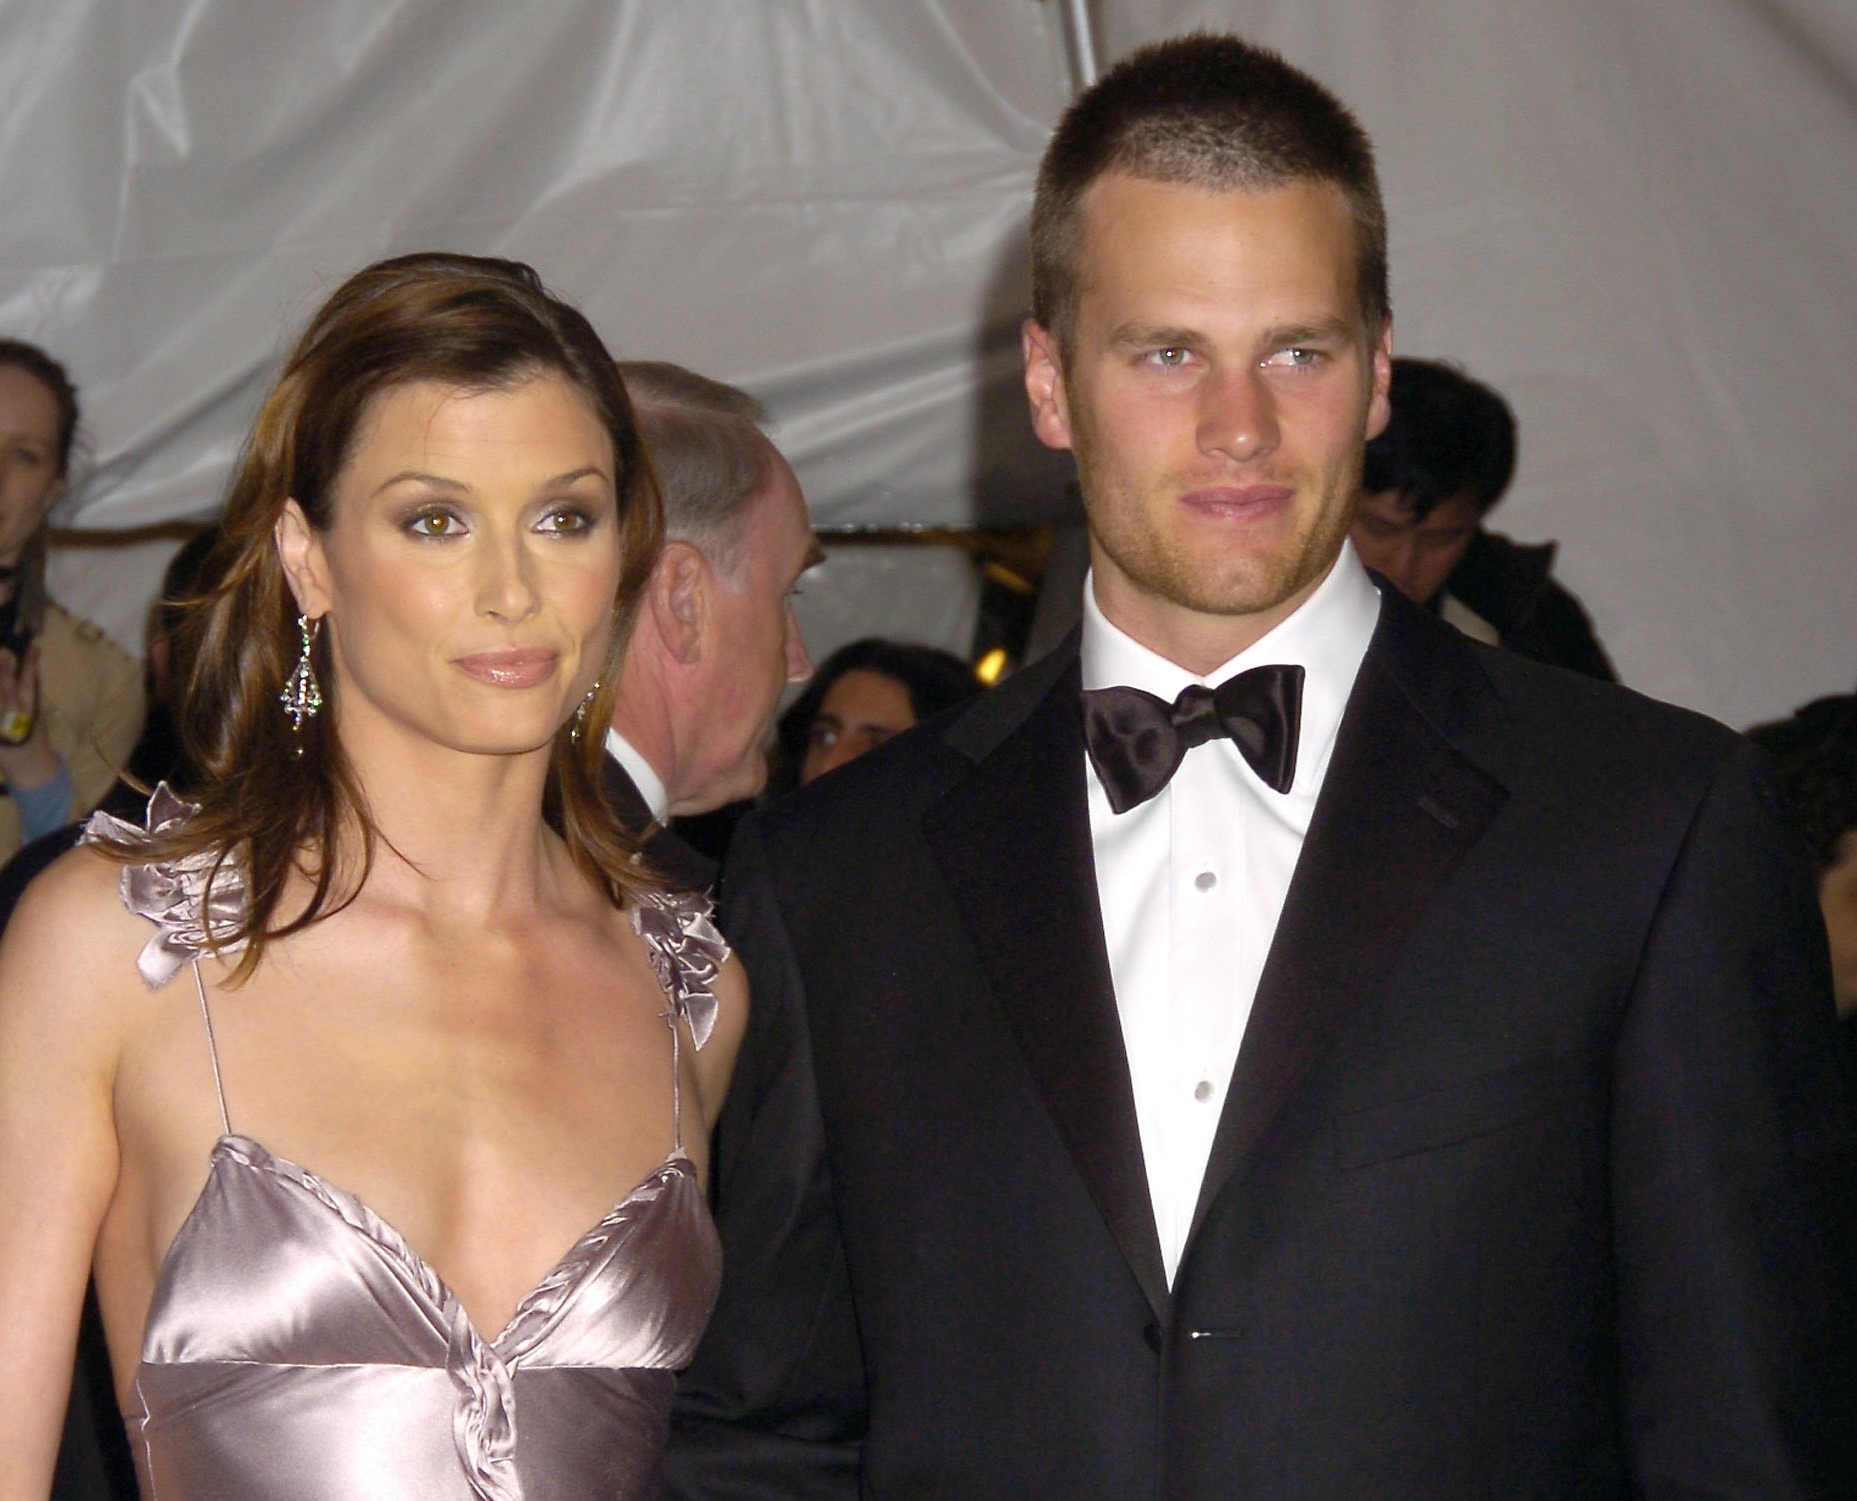 Bridget Moynahan dressed in a shimmering gown and Tom Brady in a tuxedo at The Costume Institute Gala in 2005